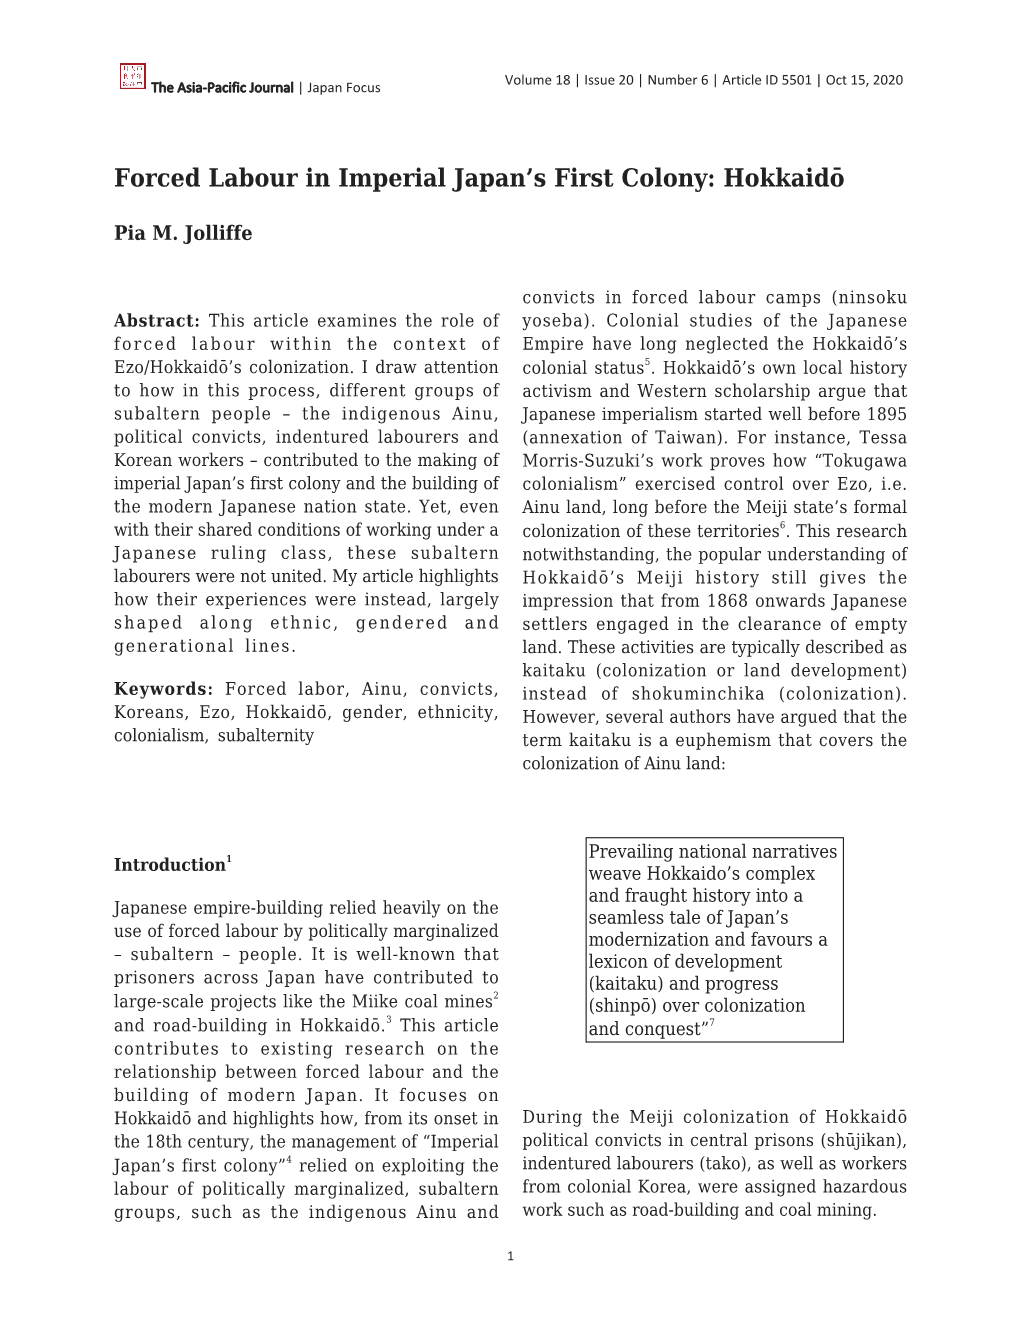 Forced Labour in Imperial Japan's First Colony: Hokkaidō